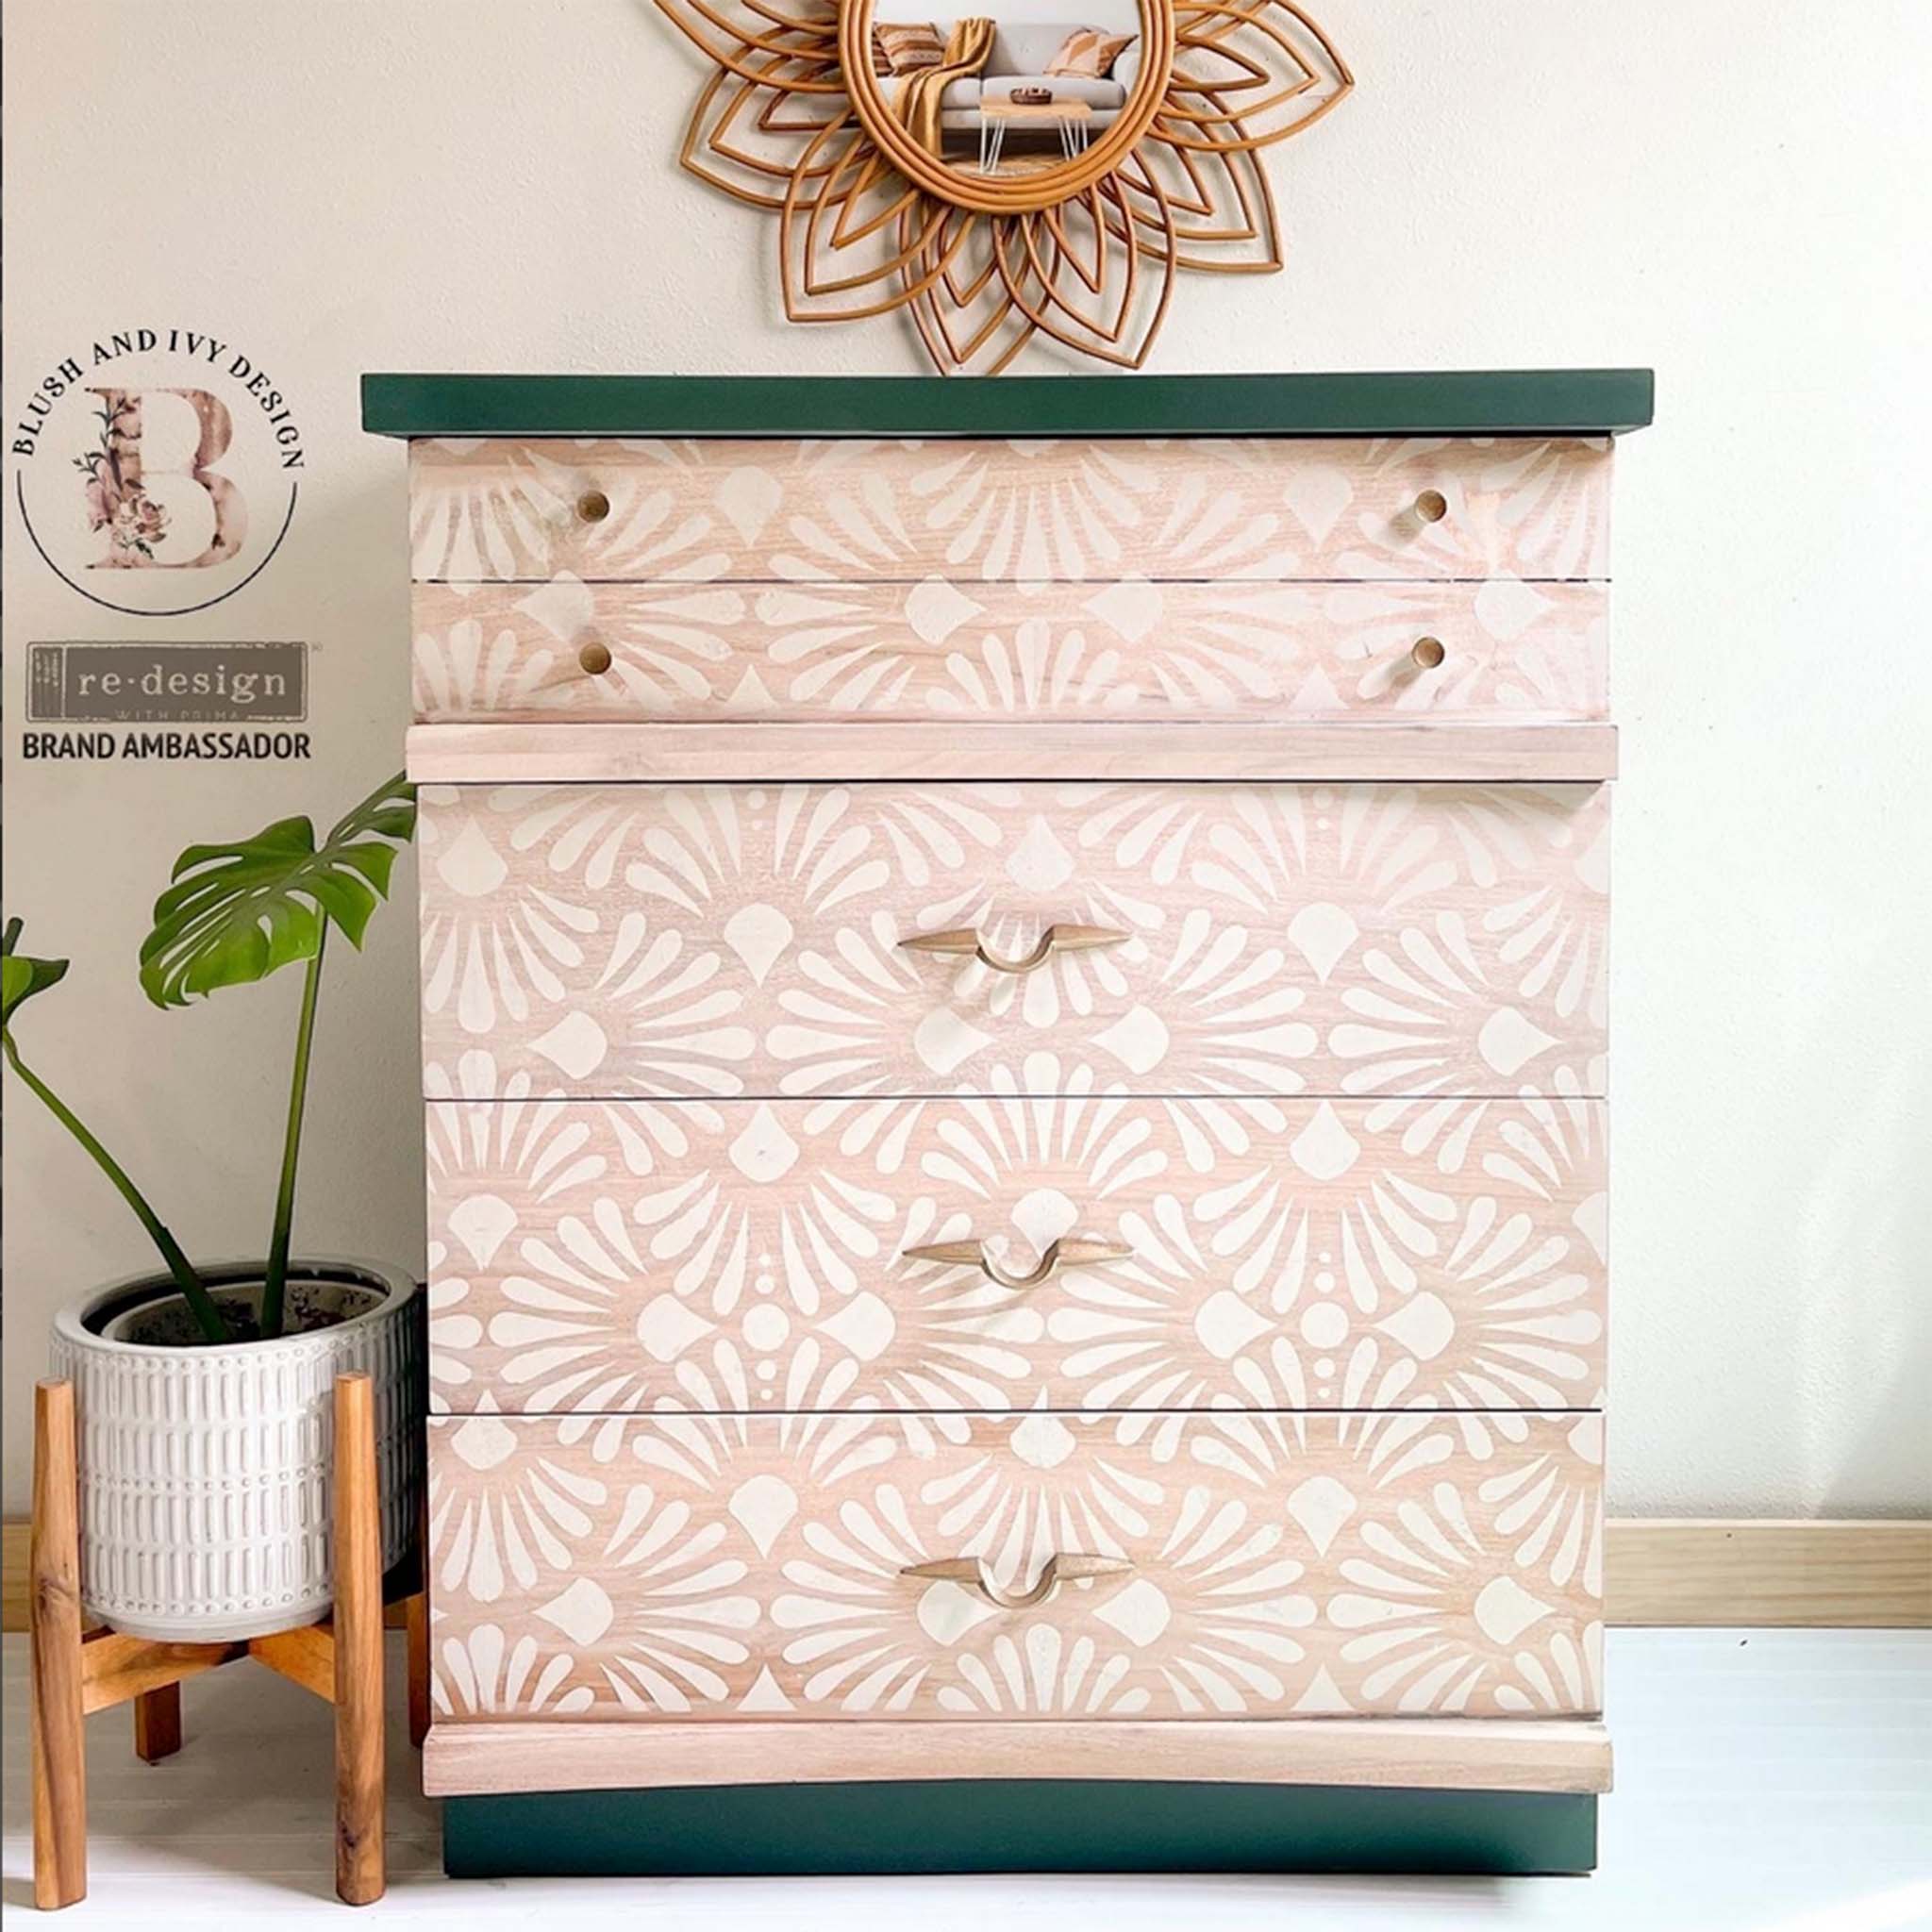 A vintage 5-drawer chest dresser refurbished by Blush & Ivy Design is a natural light wood with dark green on the top and bottom panels. ReDesign with Prima's Modern Deco stencil is in white against the natural wood drawers.